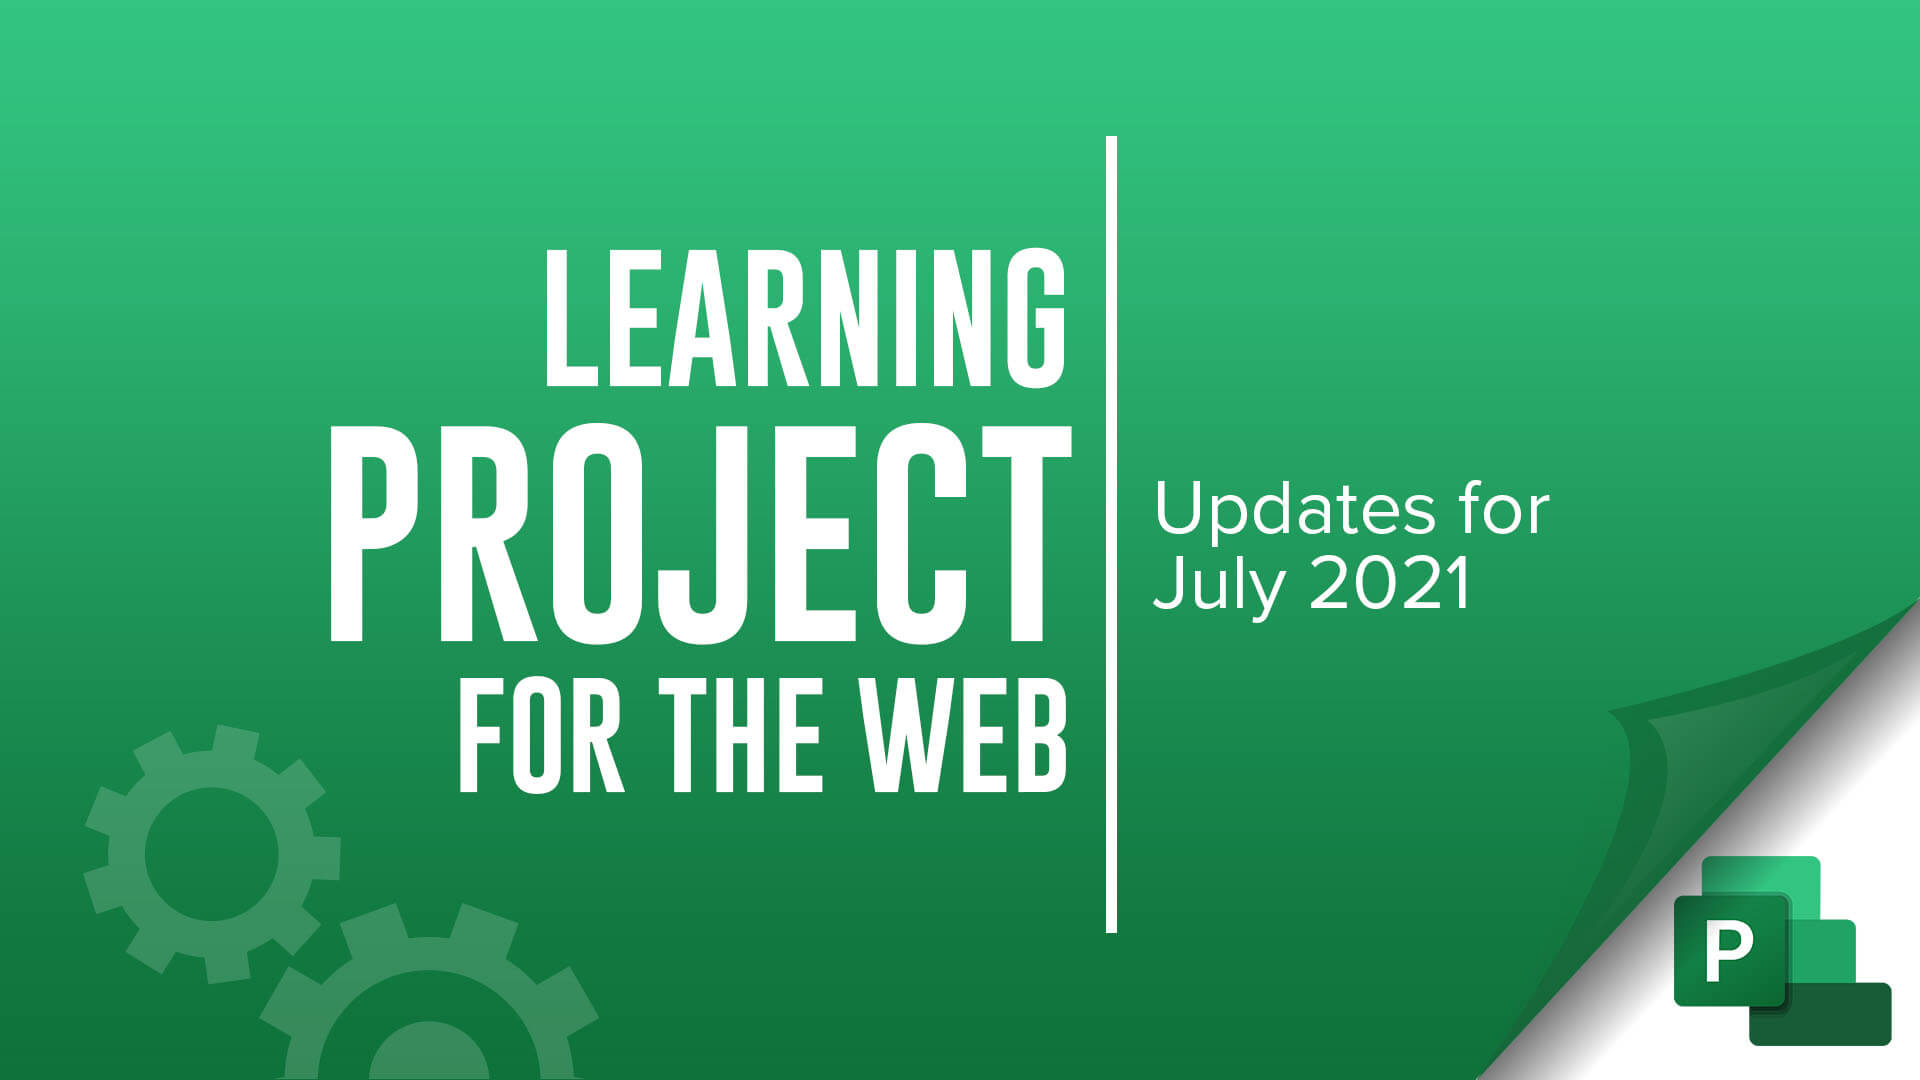 learning microsoft Project for the Web - updates for July 2021